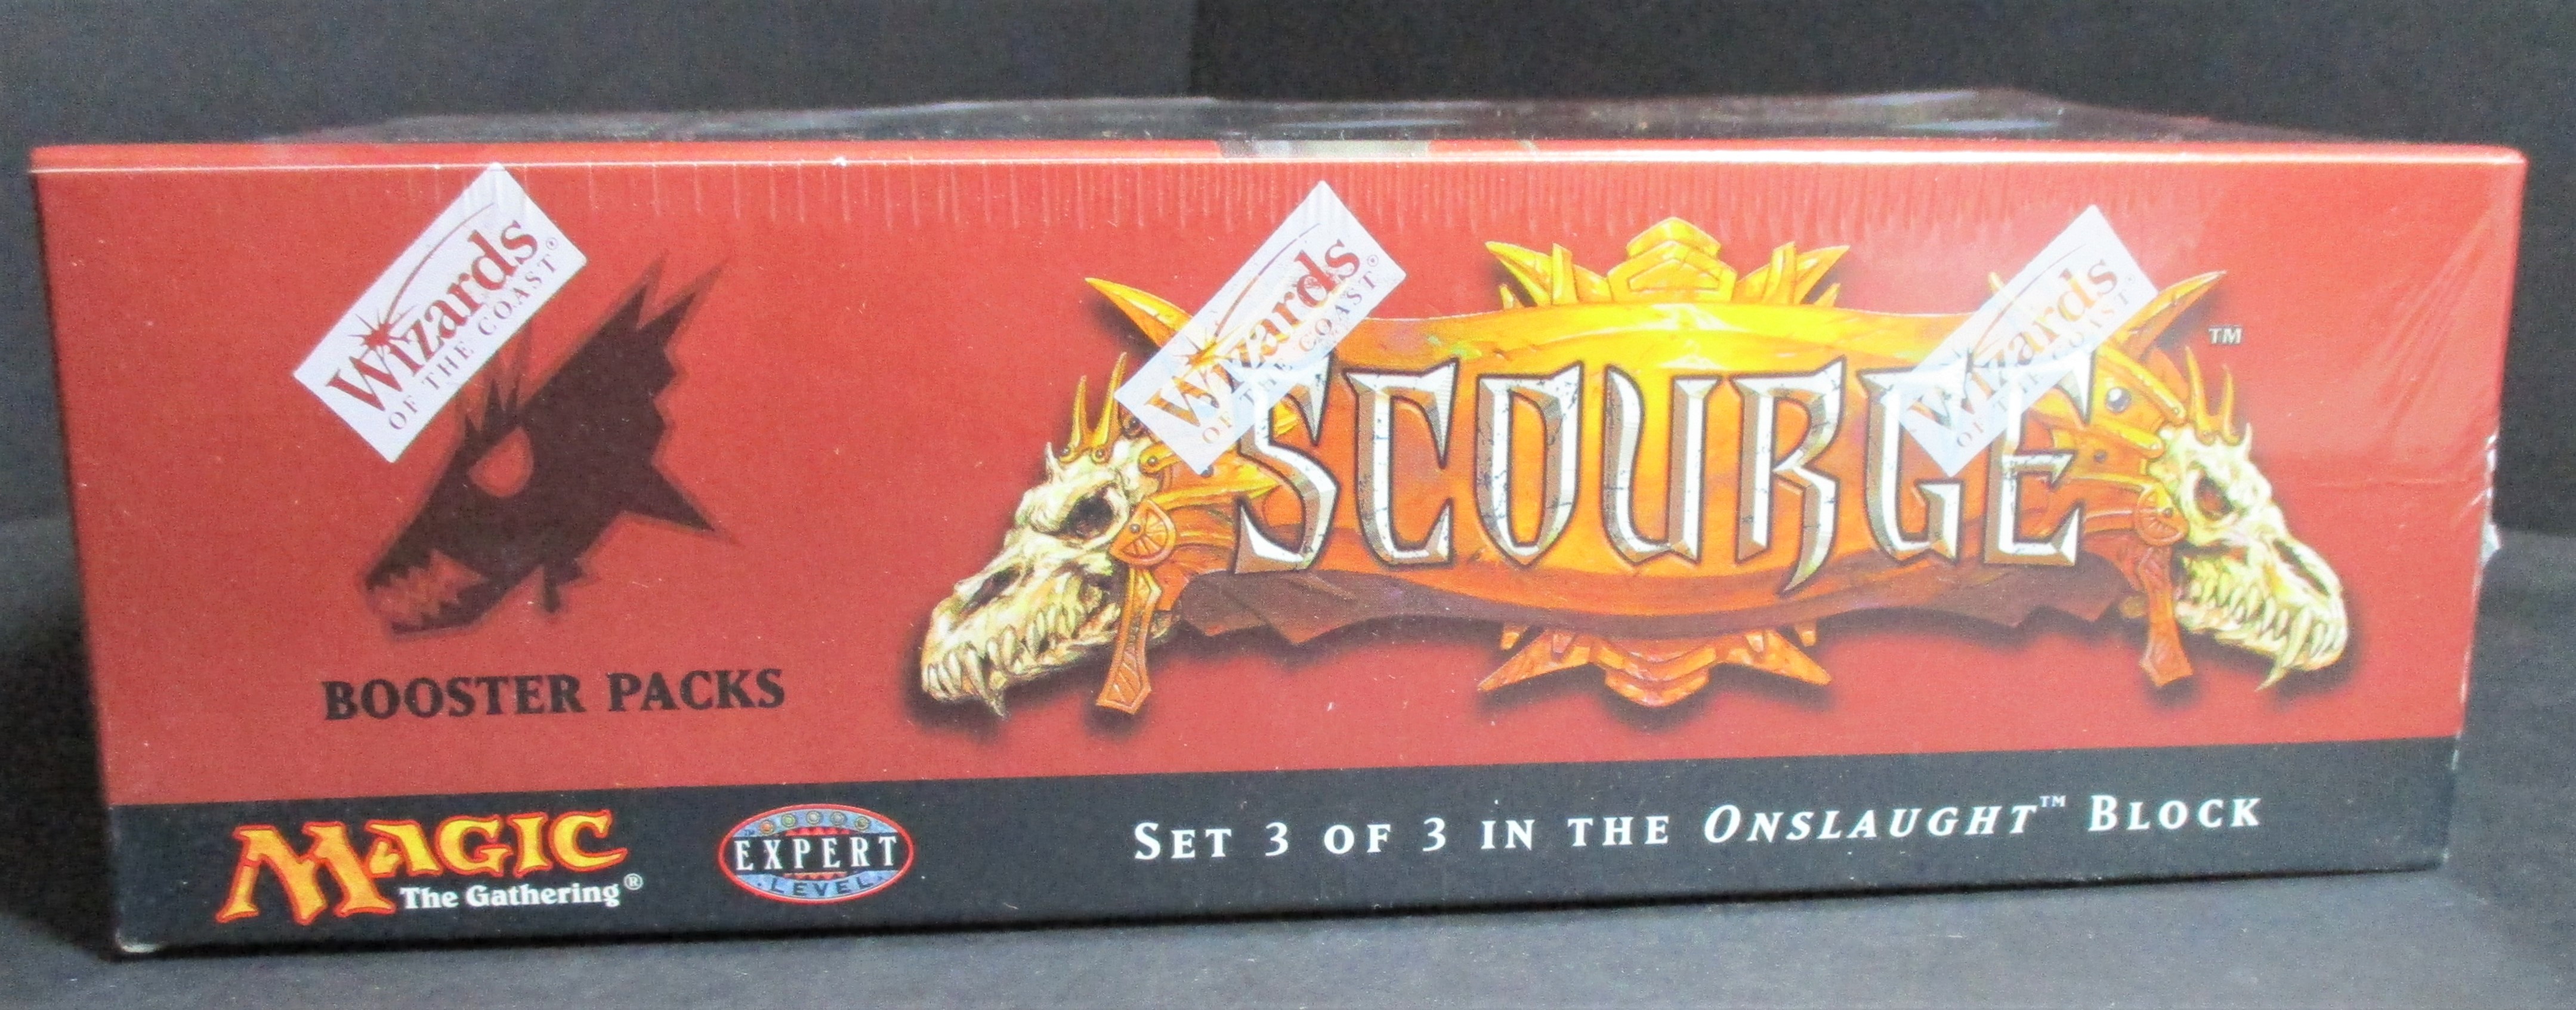 Scourge Booster Box (SEALED)